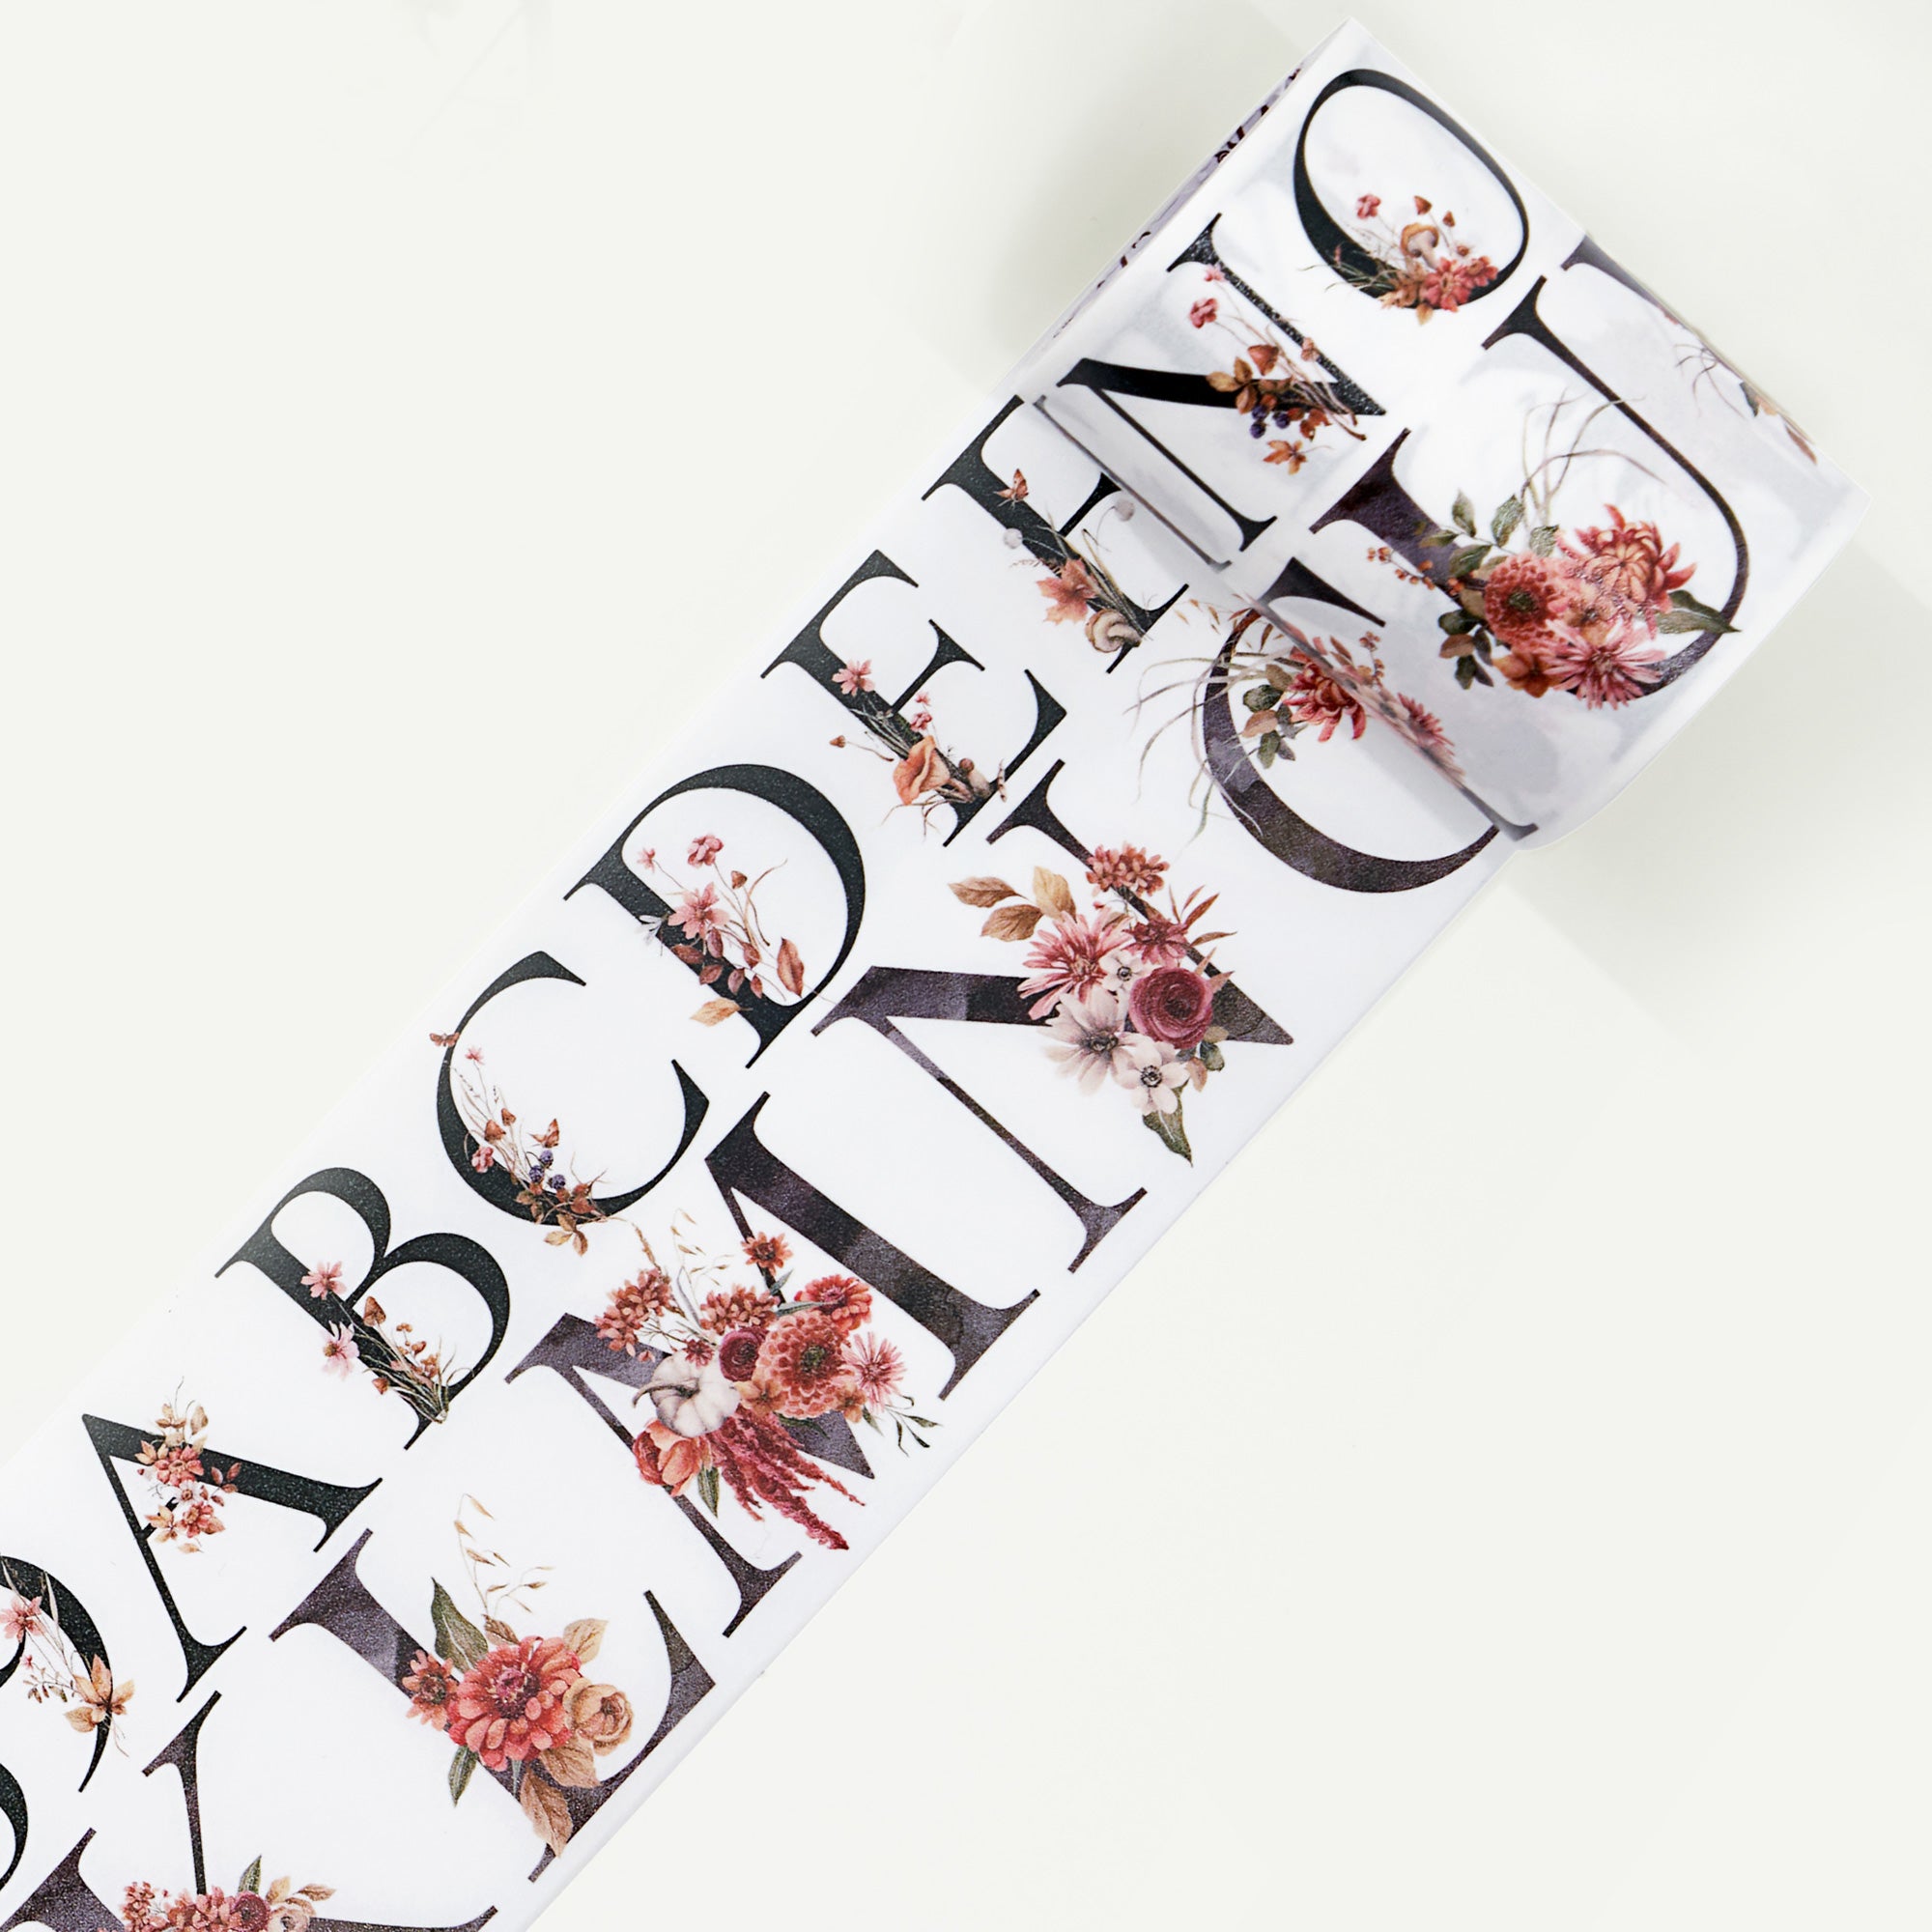 Autumn Alphabloom Wide Washi / PET Tape | The Washi Tape Shop. Beautiful Washi and Decorative Tape For Bullet Journals, Gift Wrapping, Planner Decoration and DIY Projects